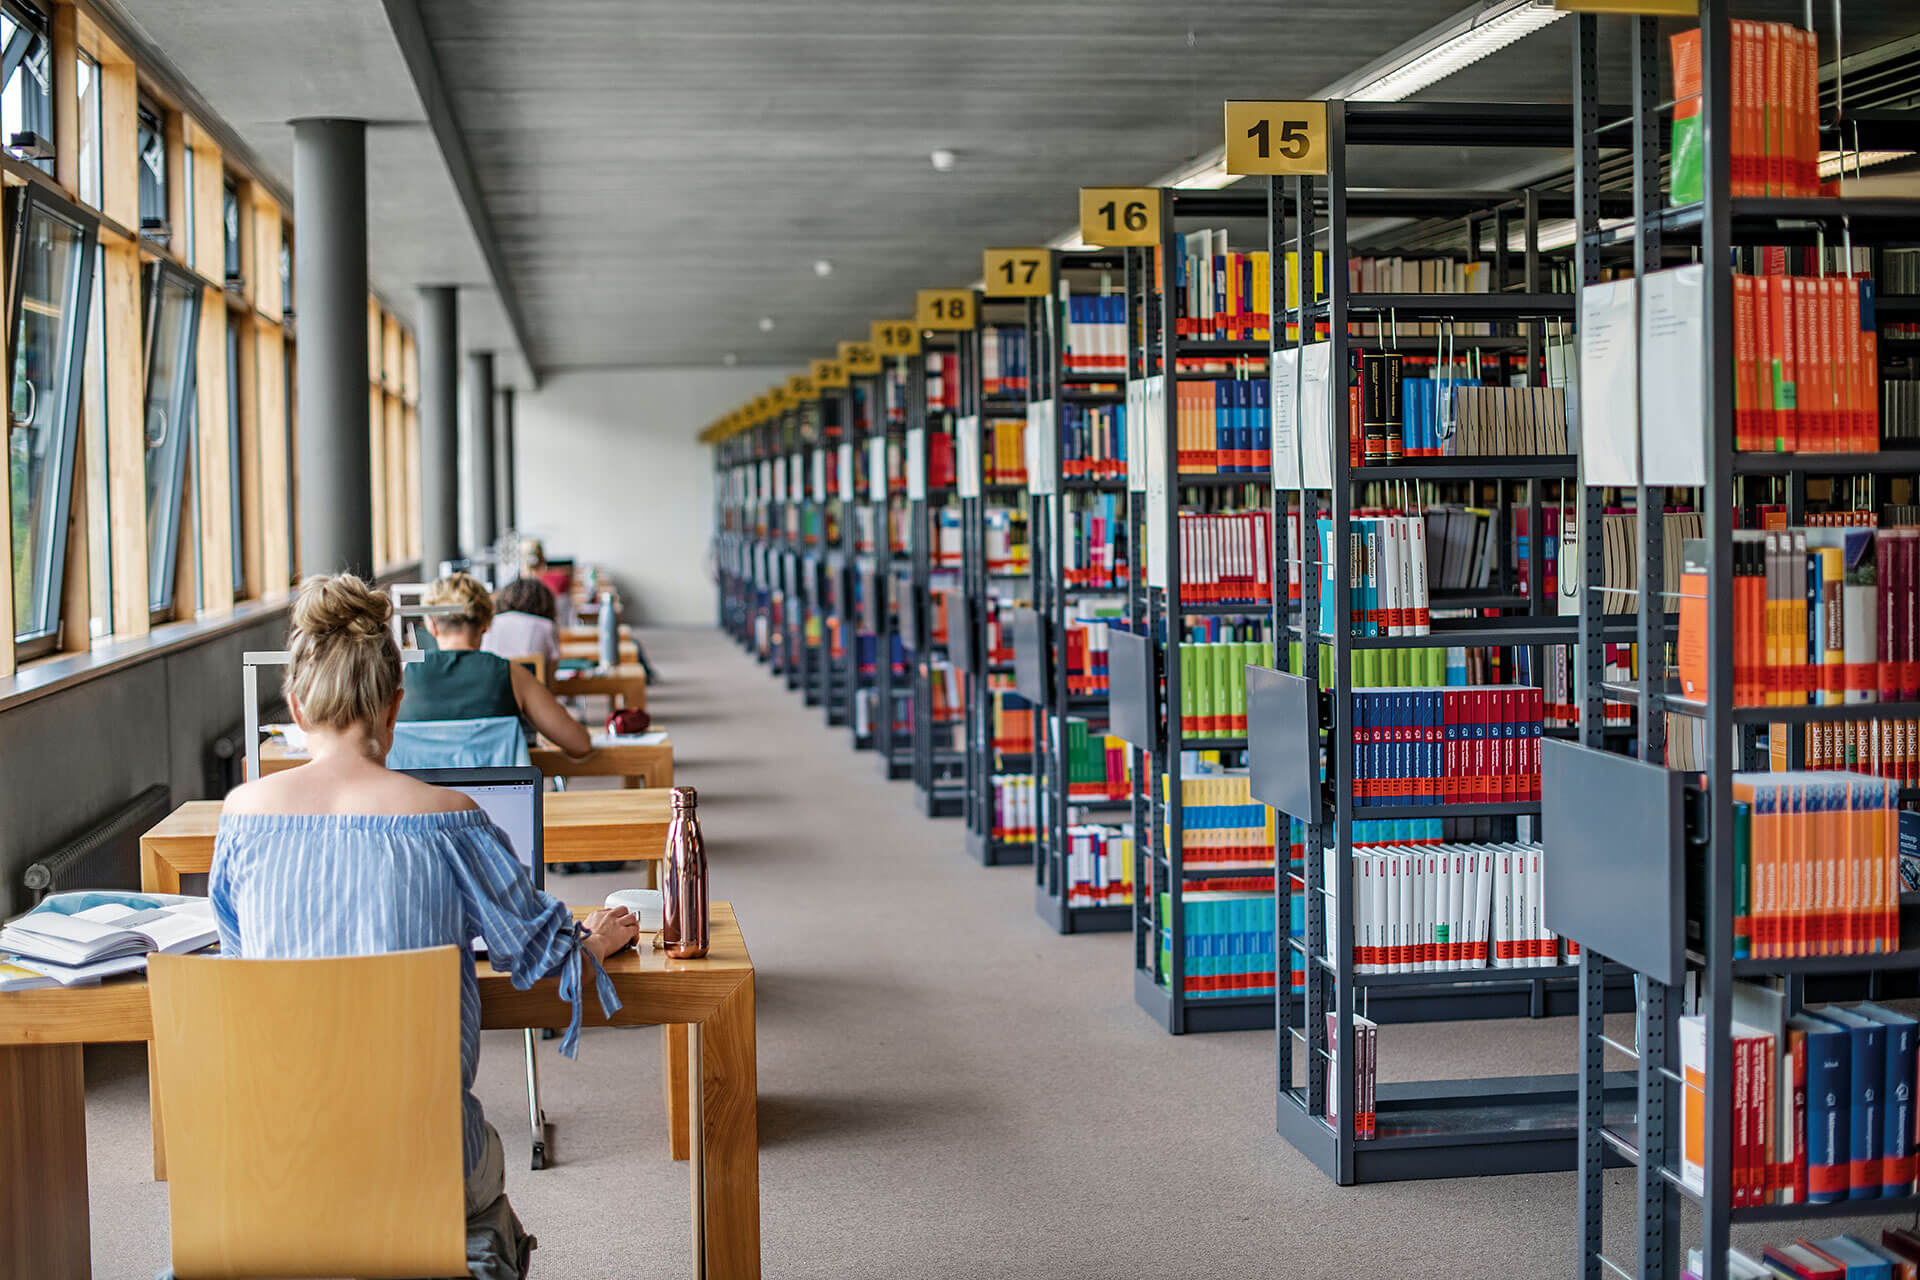 Around 1,500 students are enrolled in a total of eleven bachelor’s and master’s degree programs at the  Reinhold-Würth-Hochschule university.